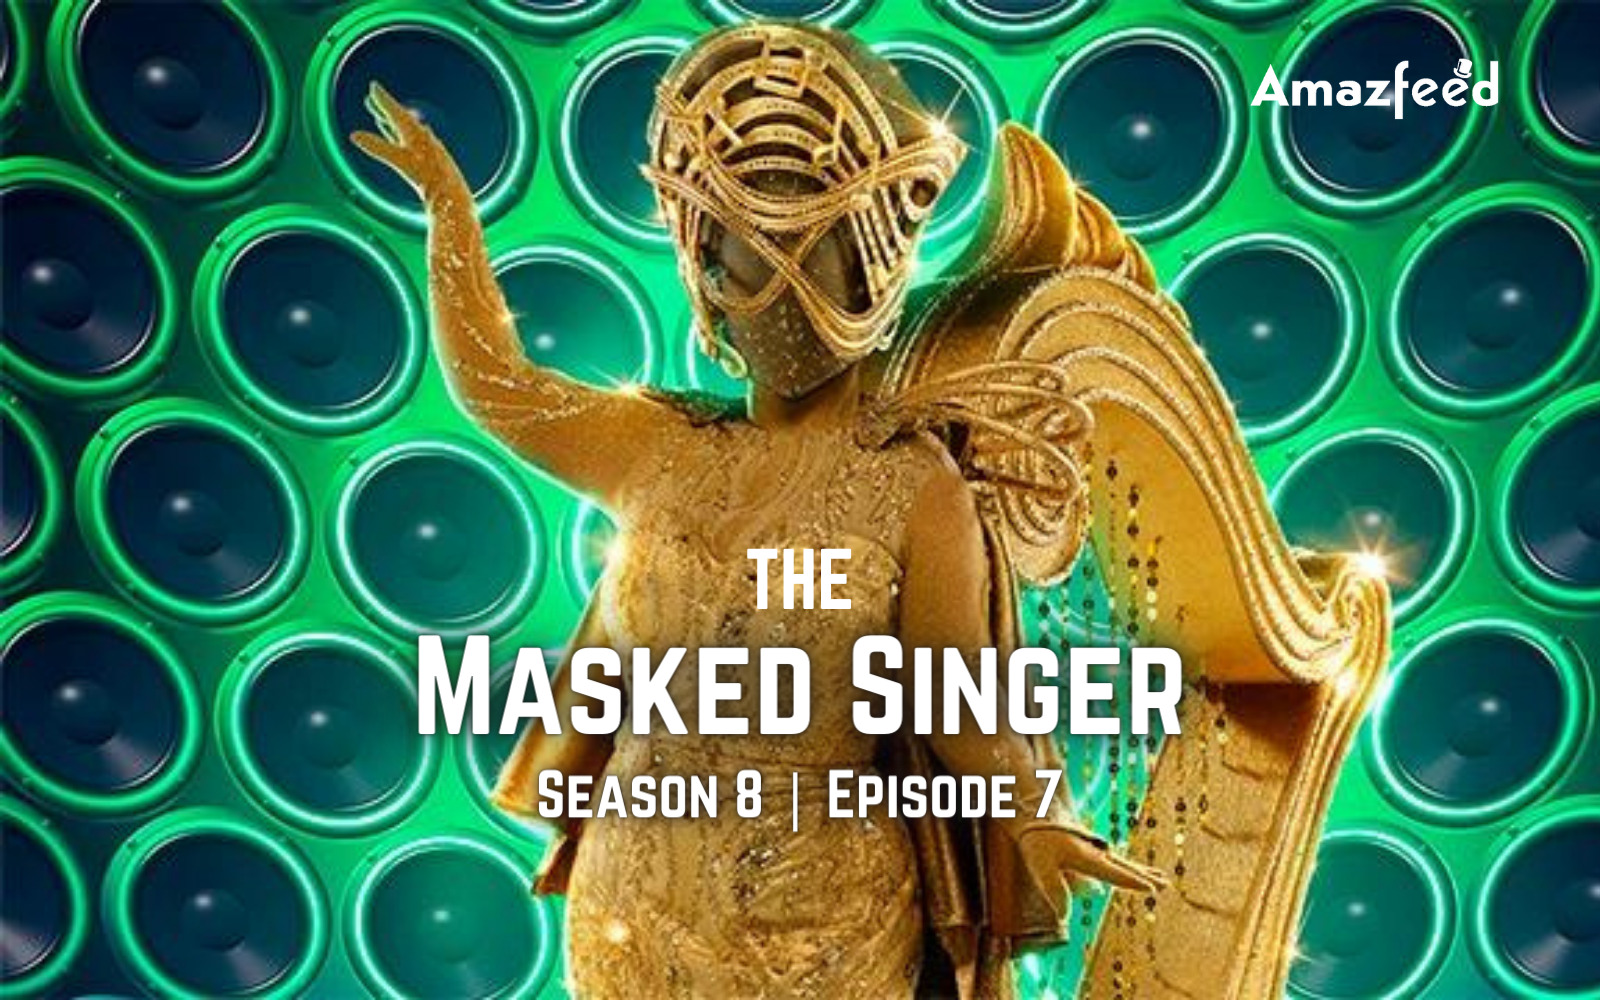 The Masked Singer Season 8 Episode 7 ⇒ Countdown, Release Date